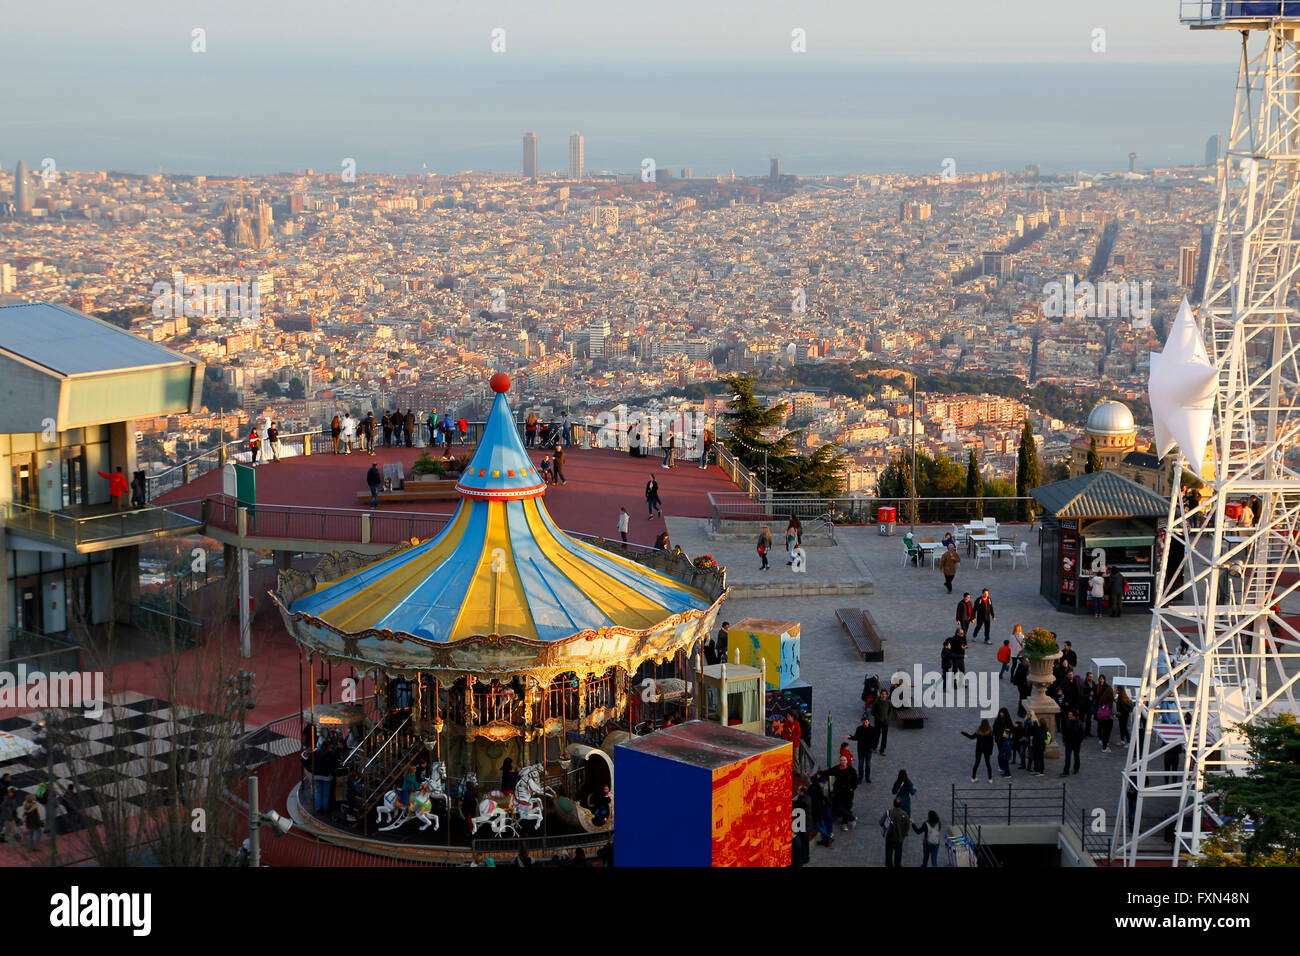 Tibidabo amusement park, with people having fun in the top of the city of Barcelona, Spain Stock Photo